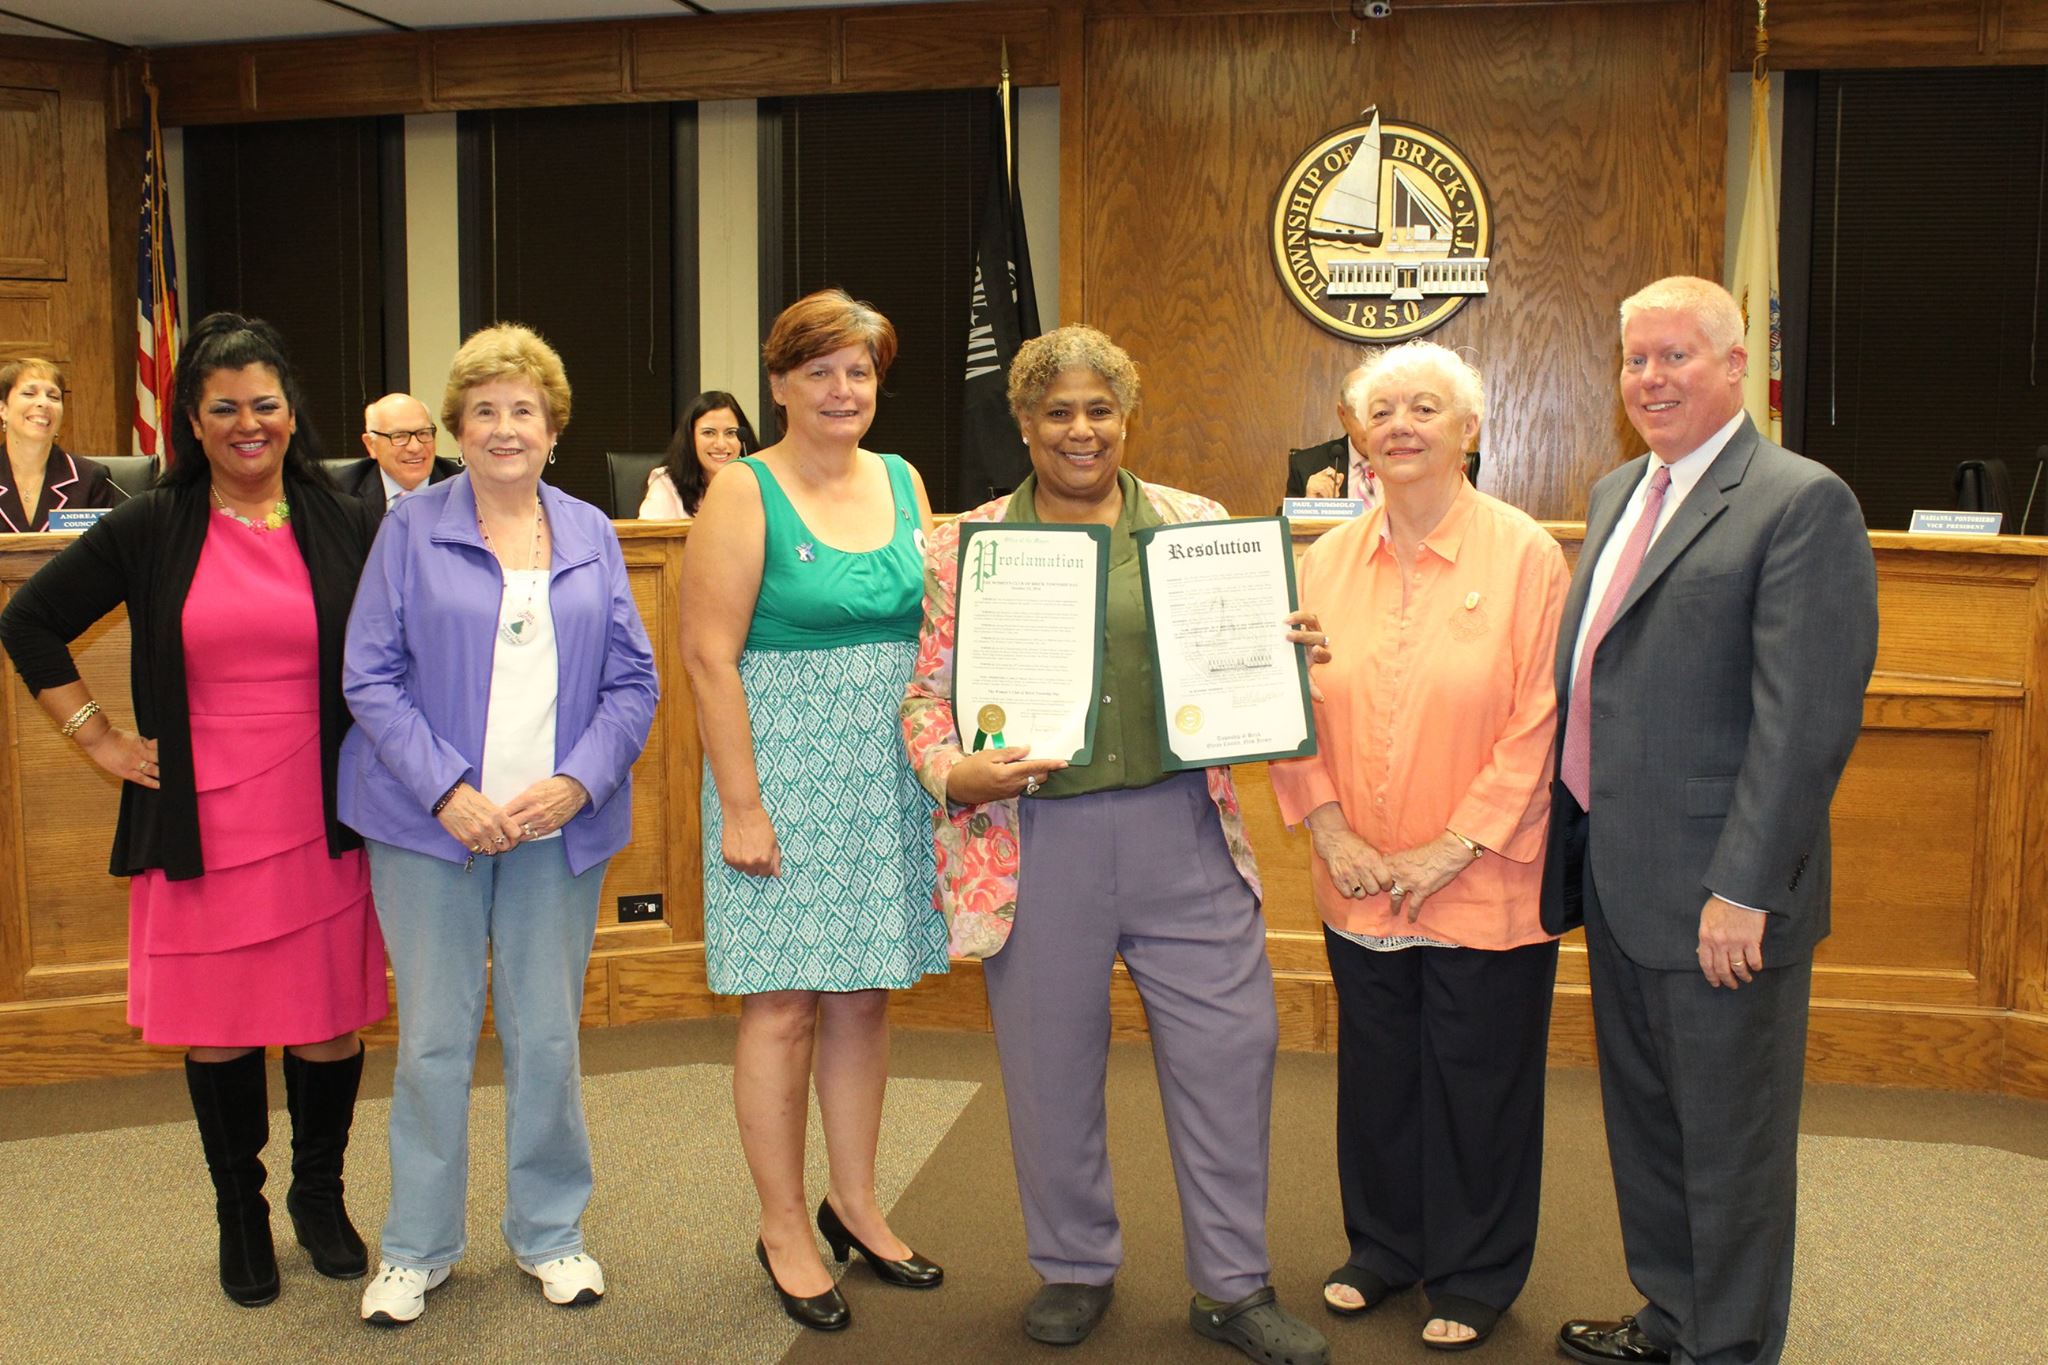 Members of the Women's Club of Brick accept a proclamation from Mayor John Ducey and township council members. (File Photo)